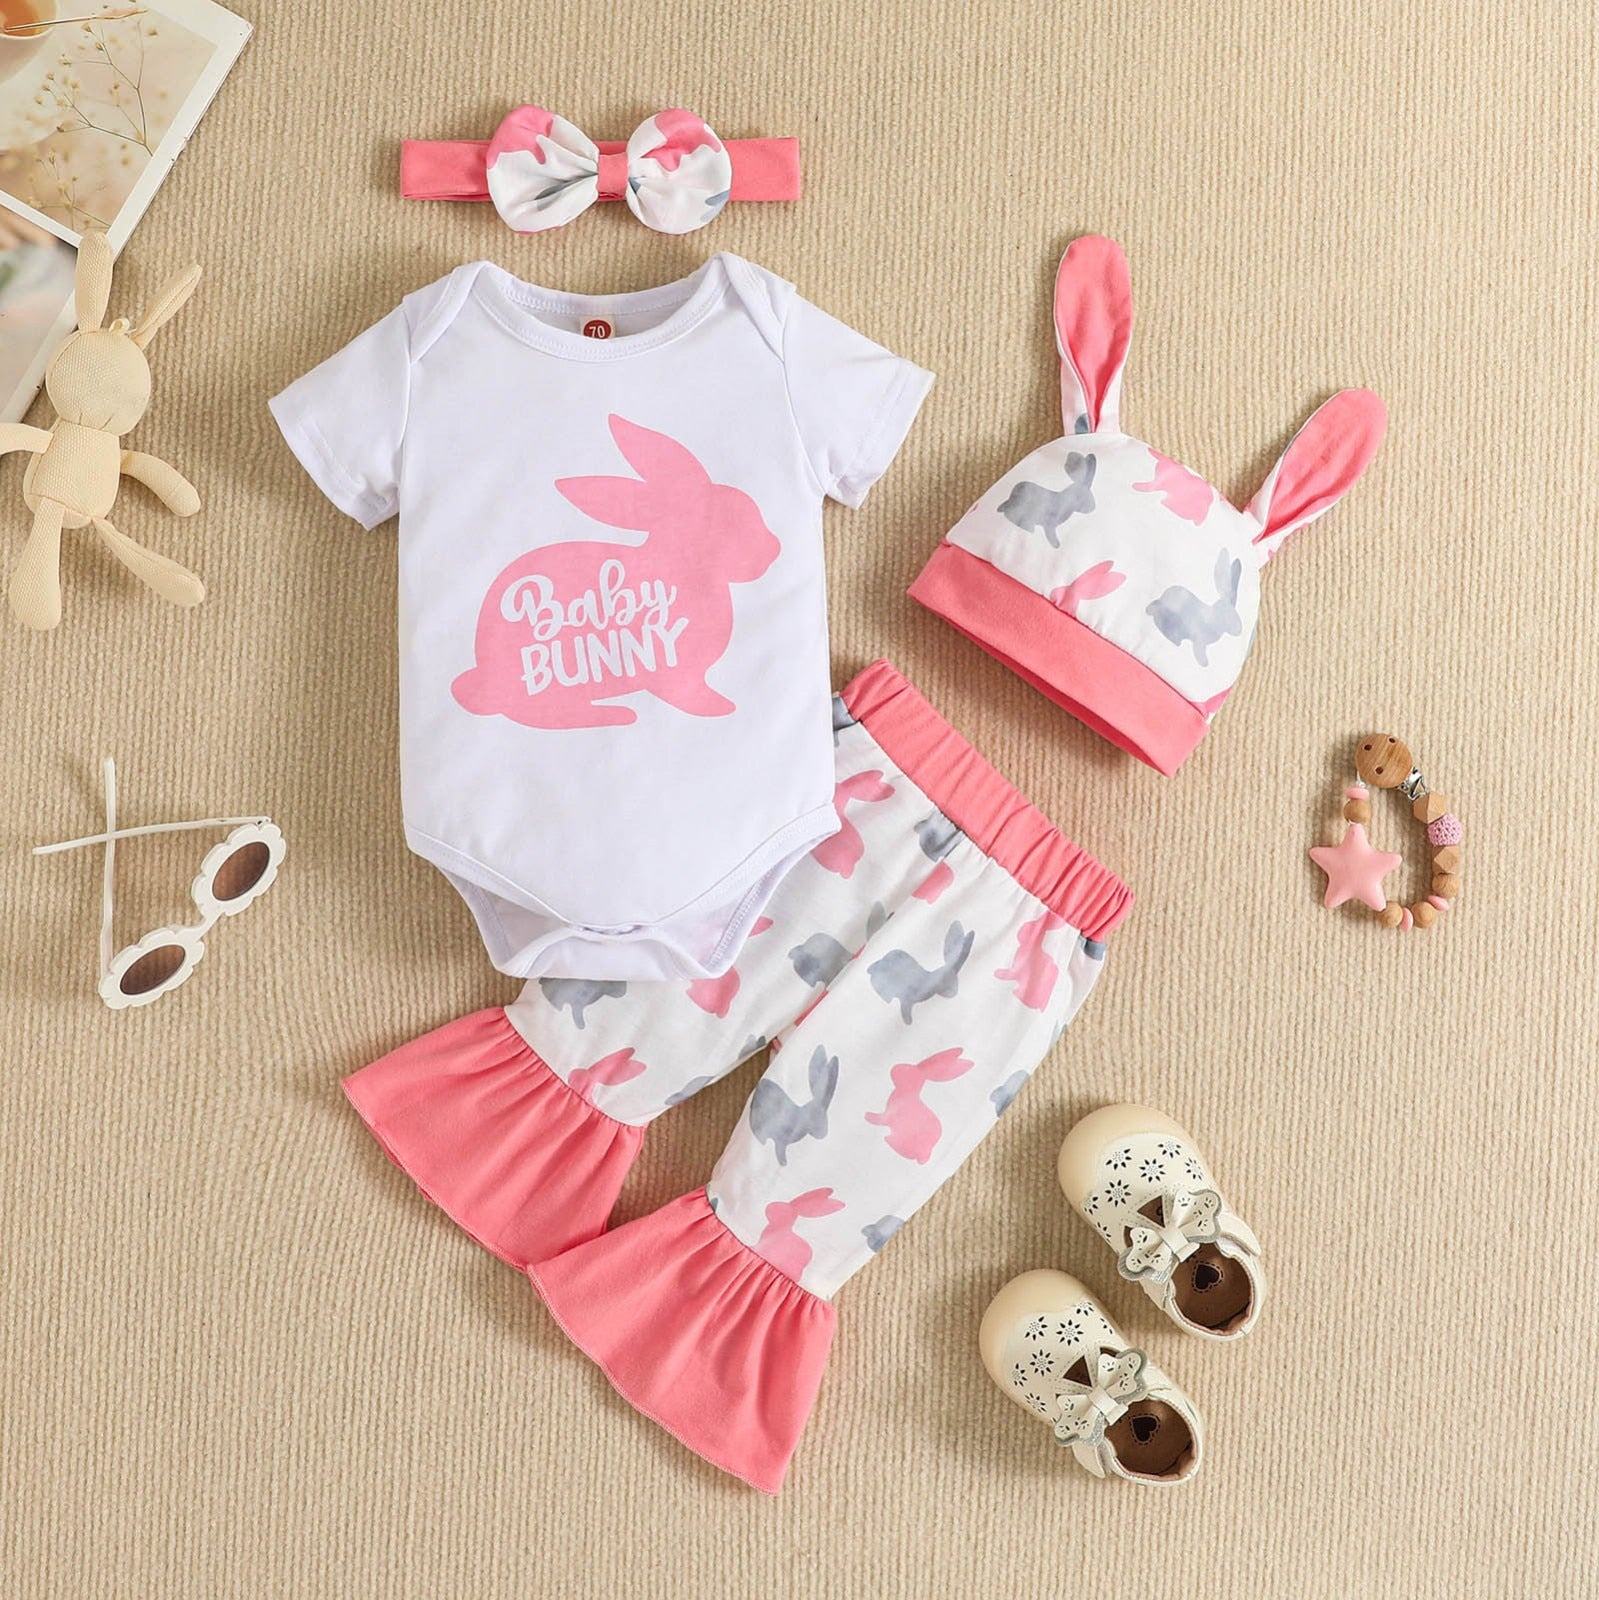 4Pcs Newborn Infant Baby Girls Cute Summer Clothes Sets with Rabbit Theme